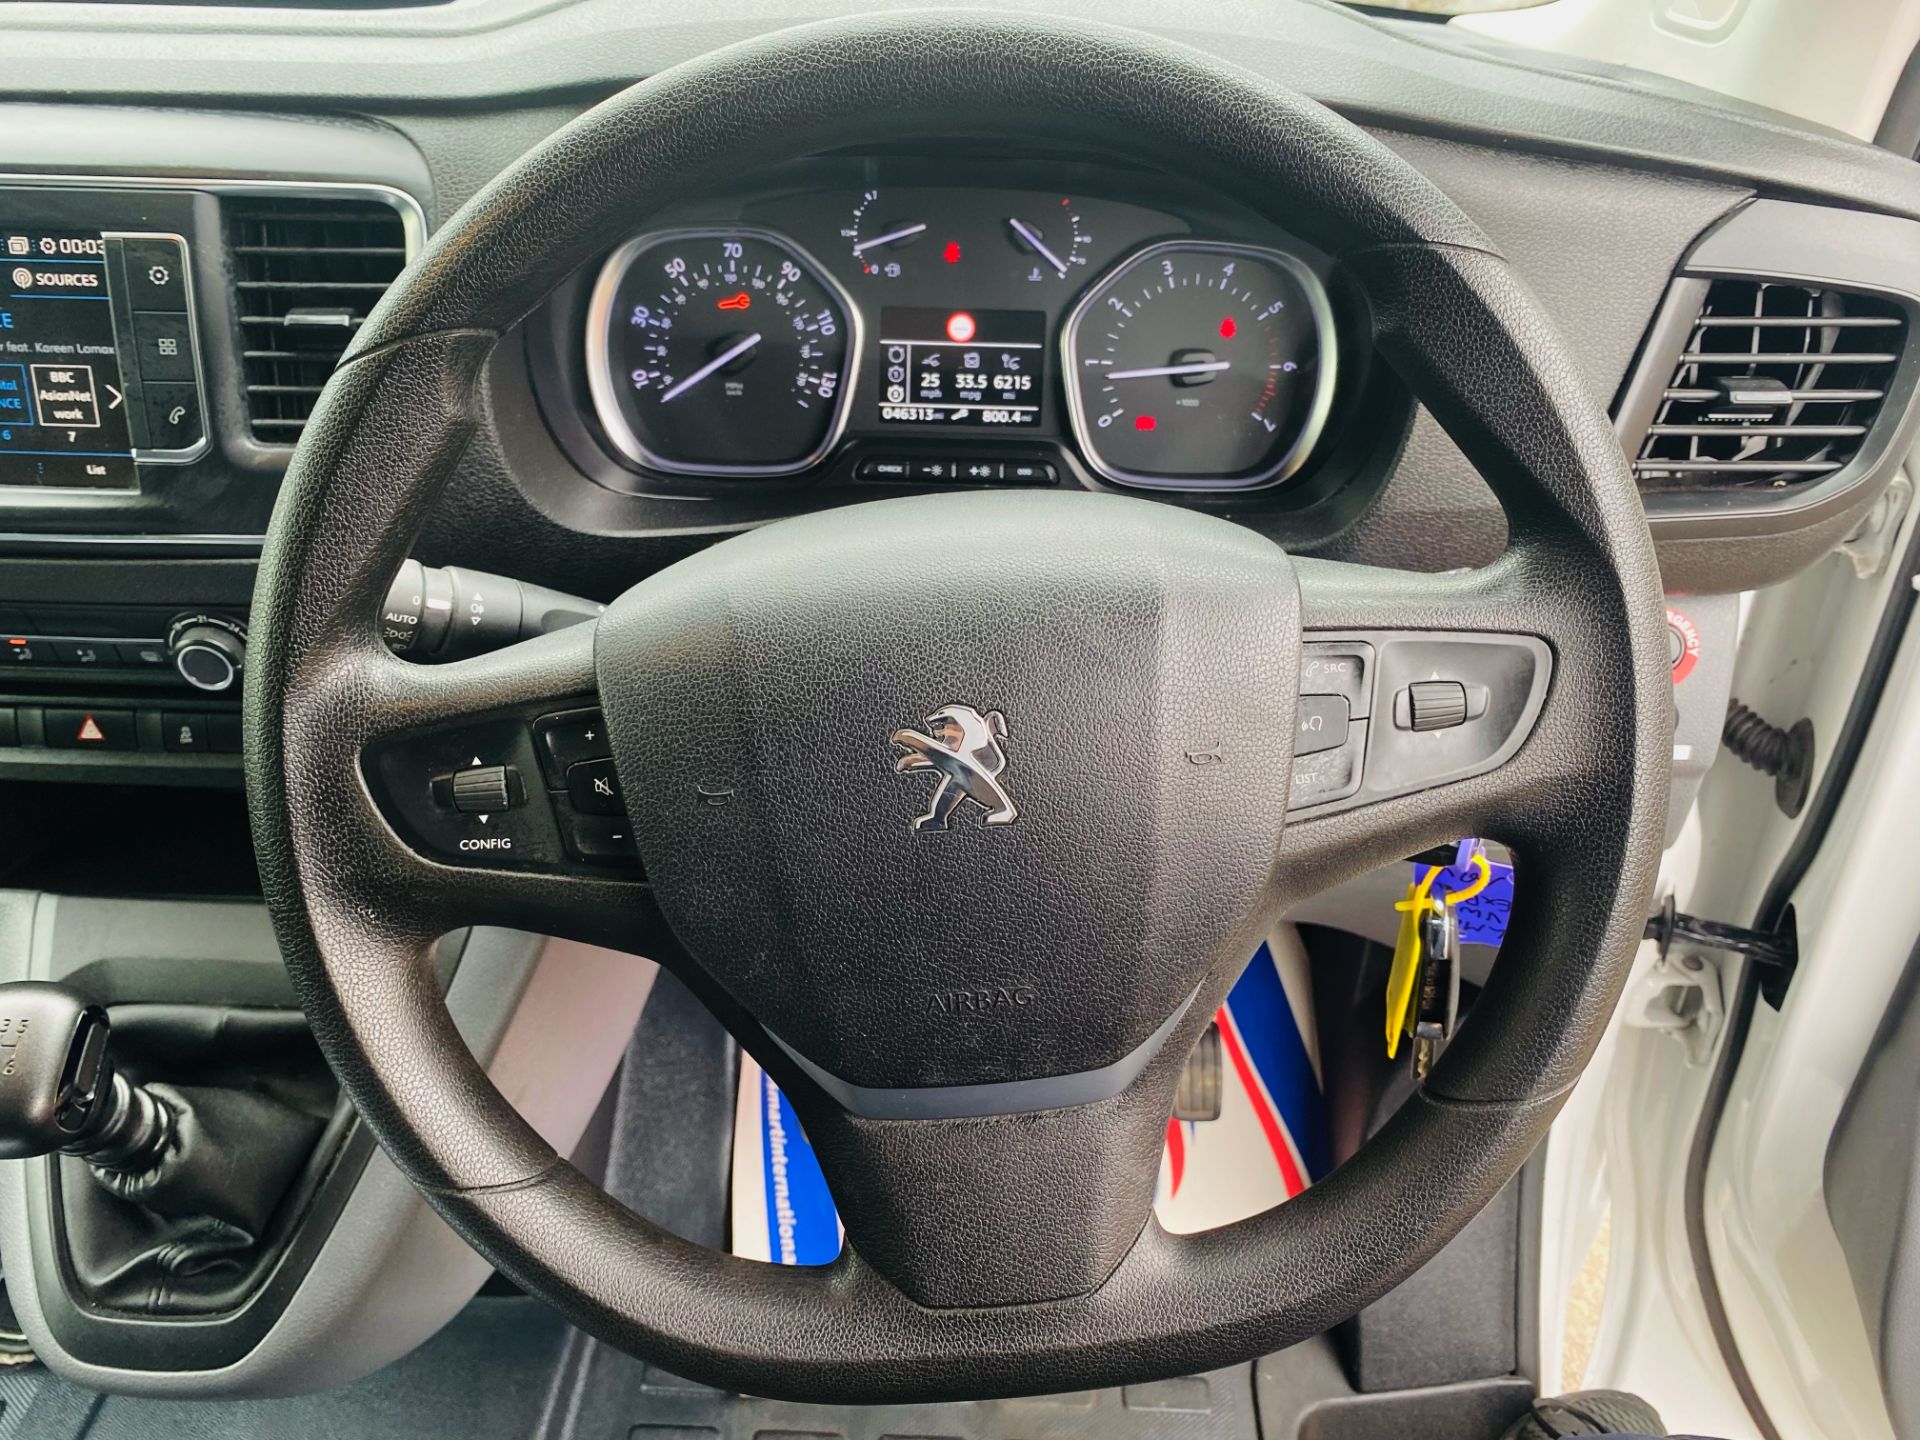 RESERVE MET - PEUGEOT EXPERT PROFESSIONAL 2.0 BLUE HDI - ONLY 46312 MILES - 2018 MODEL - EURO 6 - - Image 11 of 21